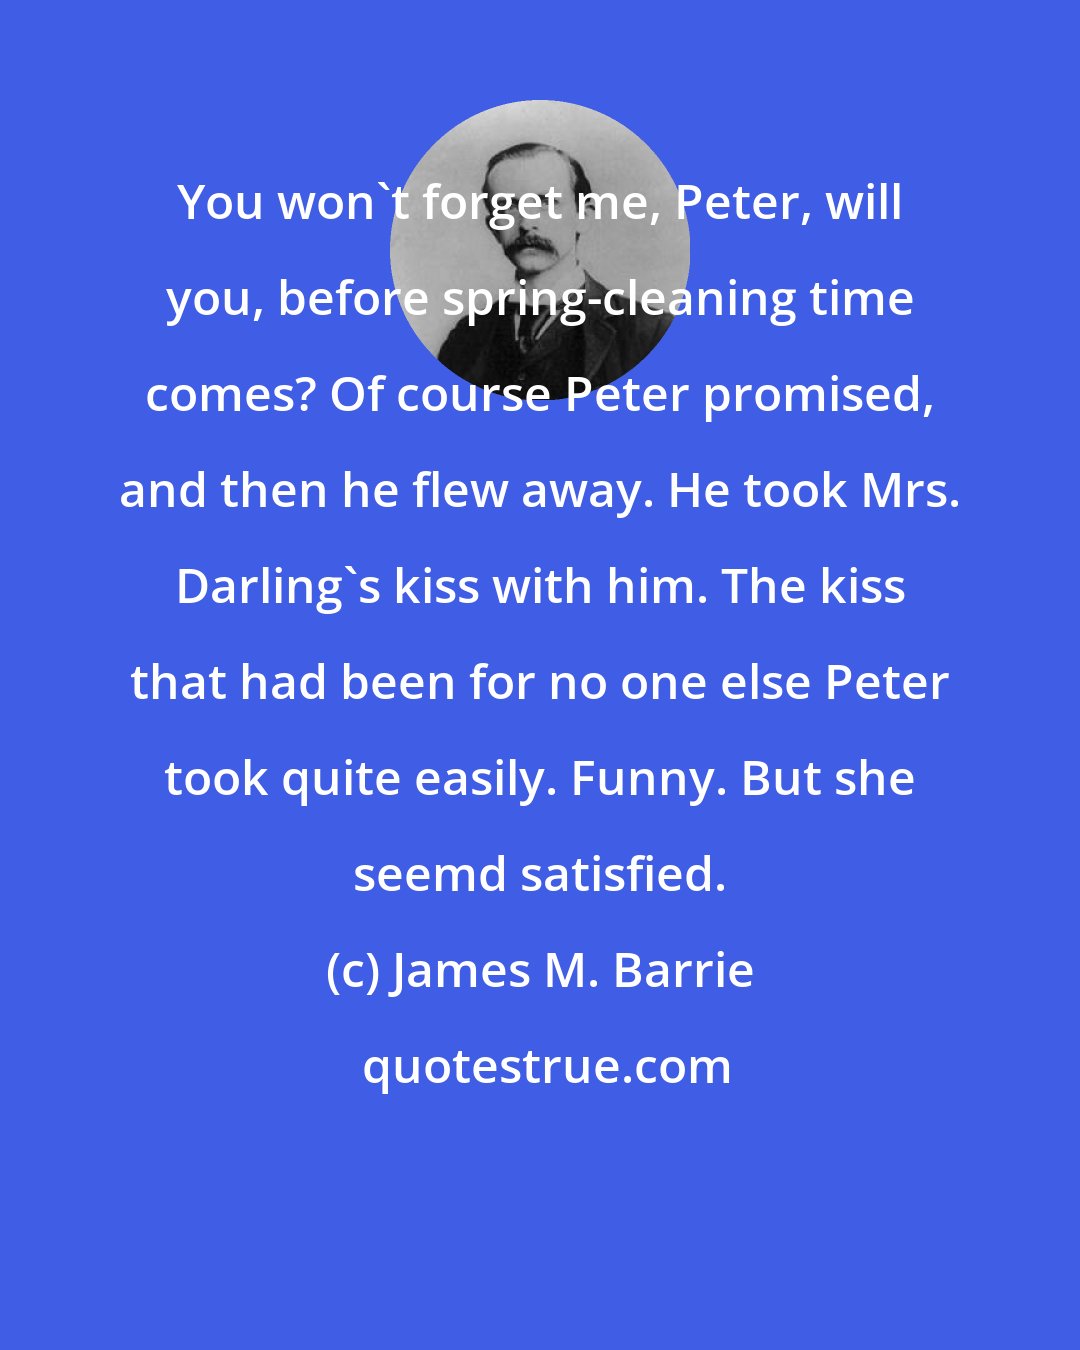 James M. Barrie: You won't forget me, Peter, will you, before spring-cleaning time comes? Of course Peter promised, and then he flew away. He took Mrs. Darling's kiss with him. The kiss that had been for no one else Peter took quite easily. Funny. But she seemd satisfied.